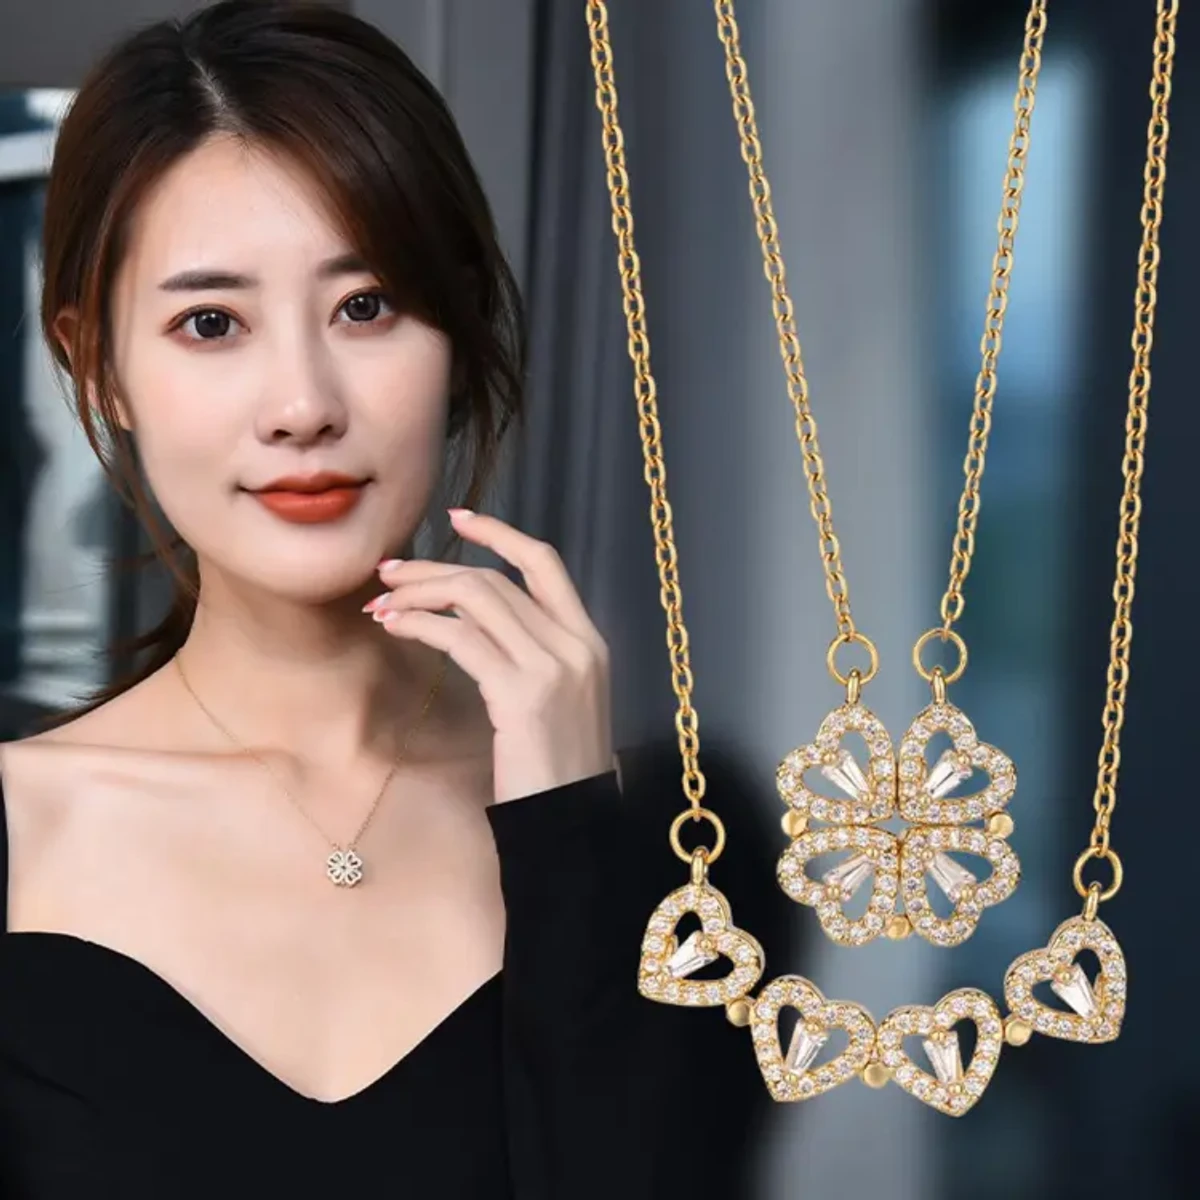 Clavicle Chain Design Lucky Neckless For Stylish Girls Or Women